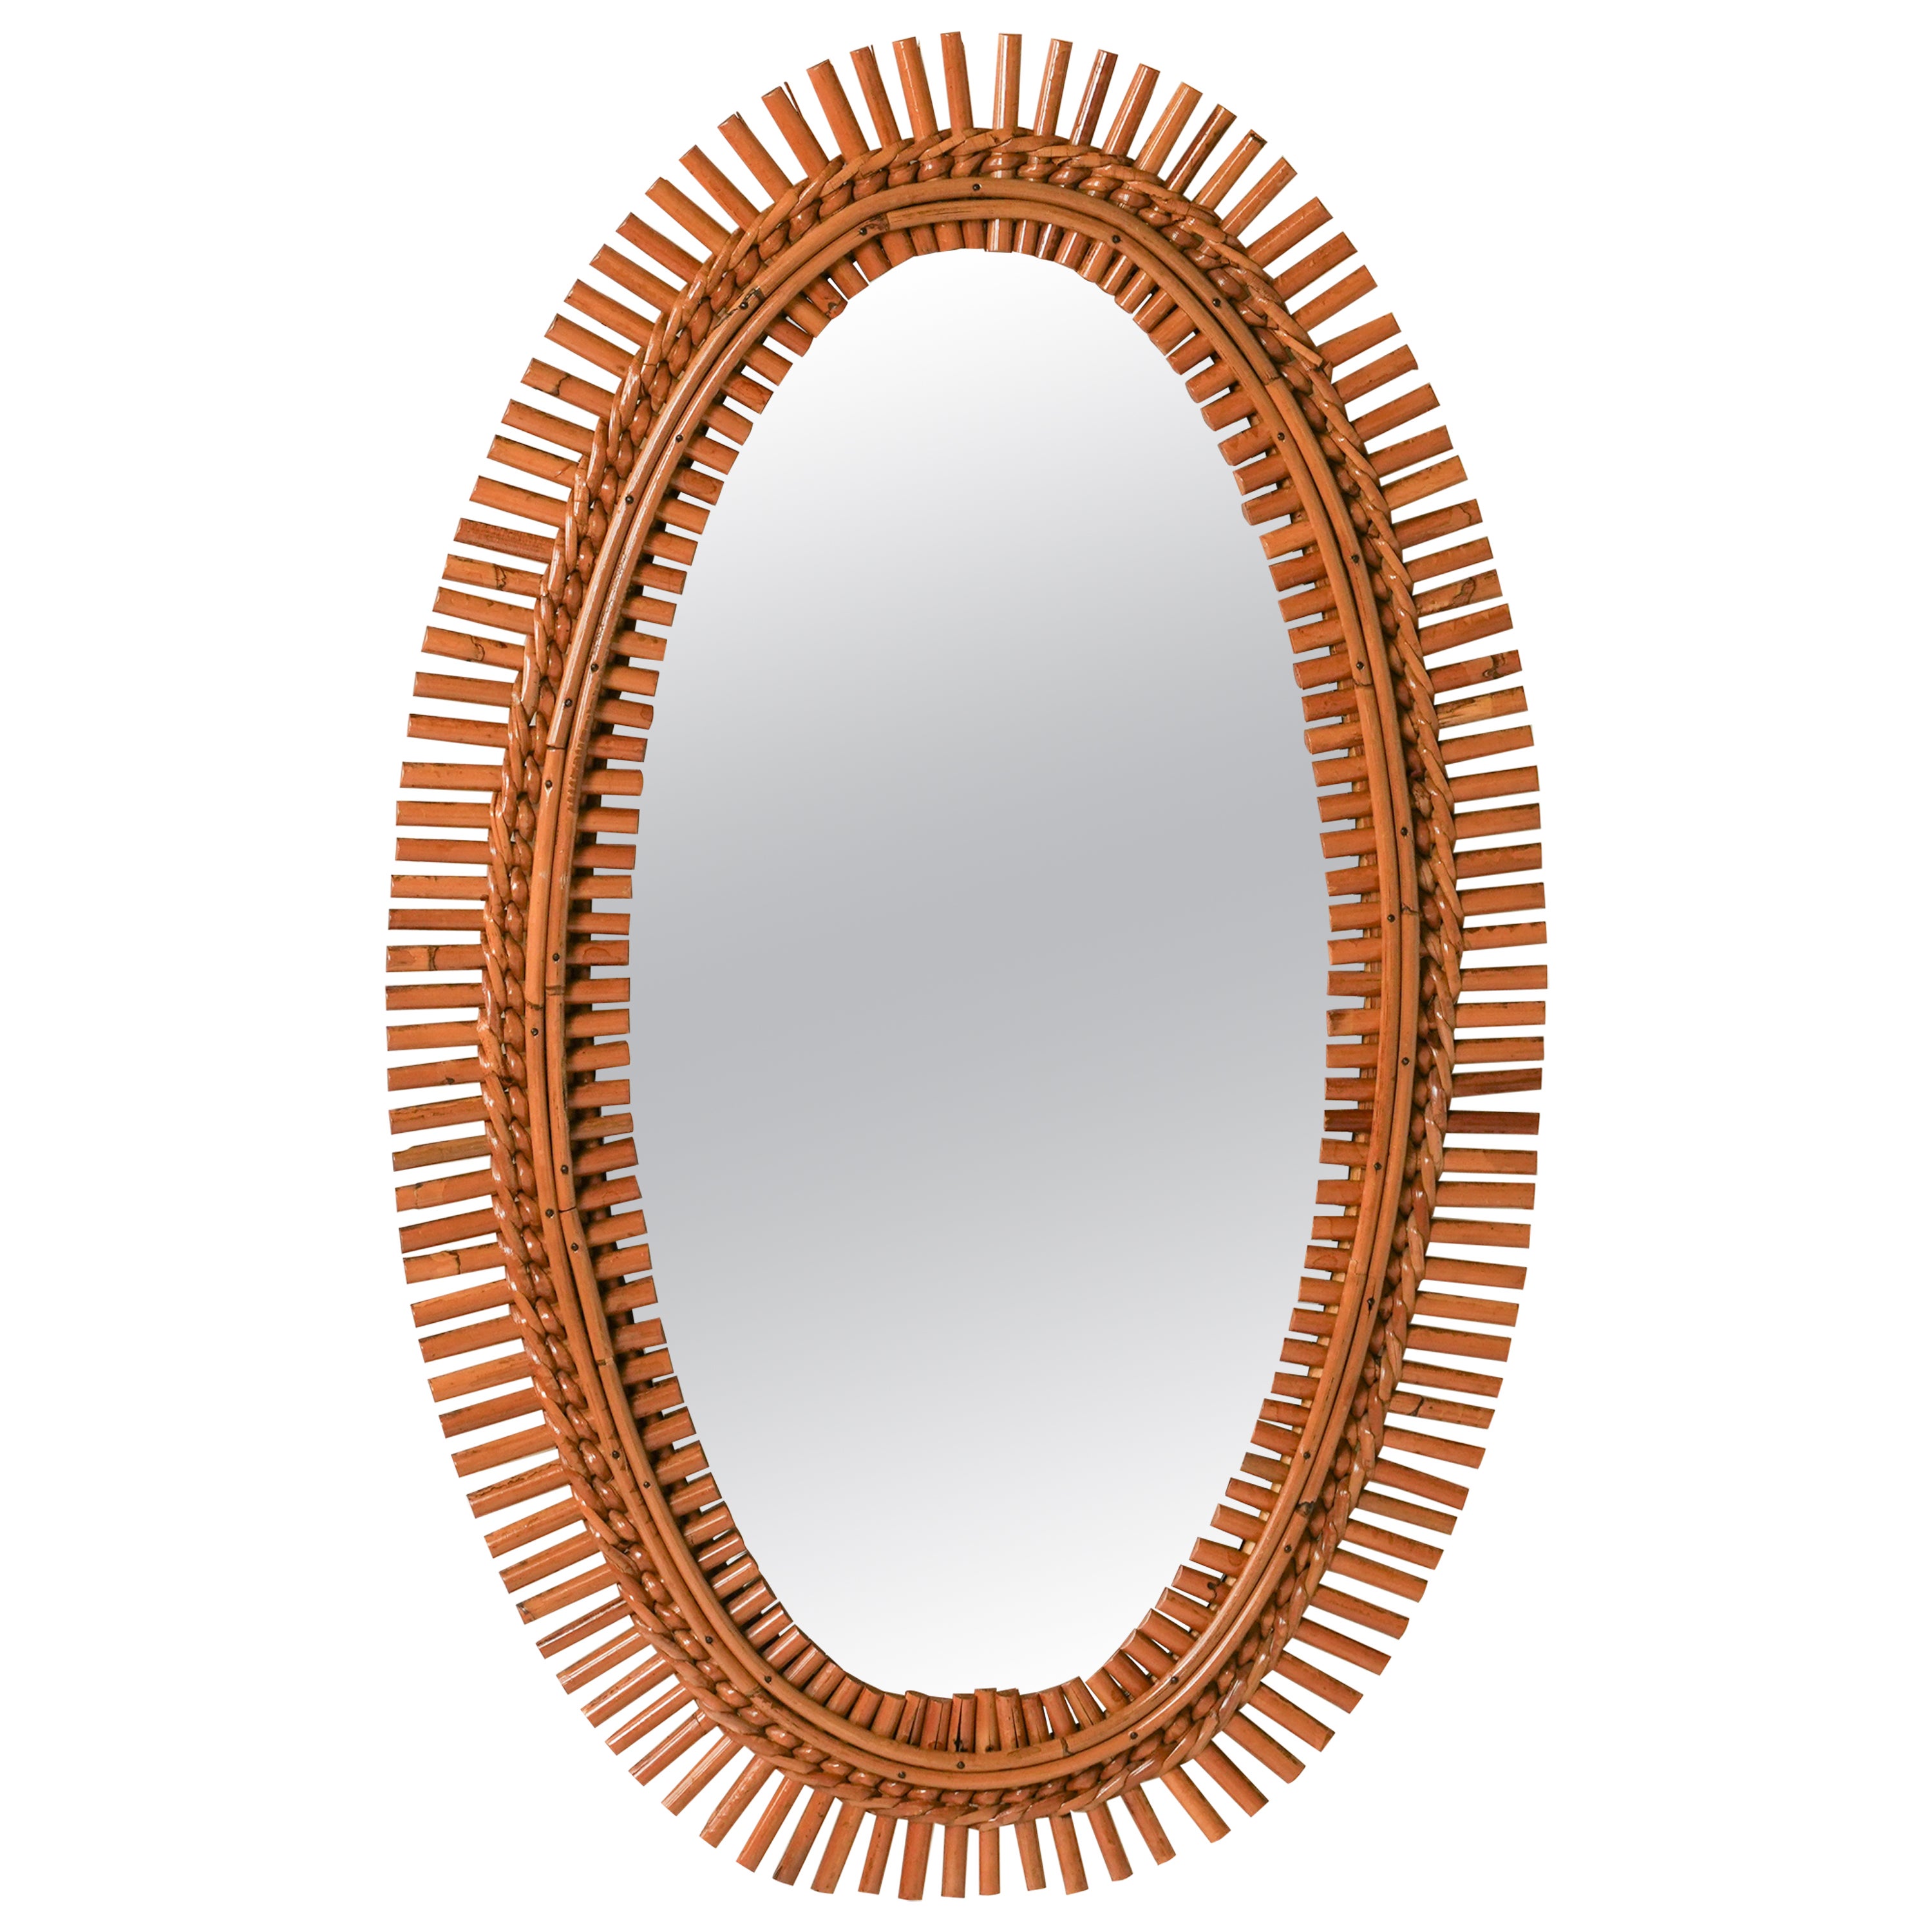 Midcentury Rattan and Bamboo Oval Wall Mirror, Italy 1960s For Sale